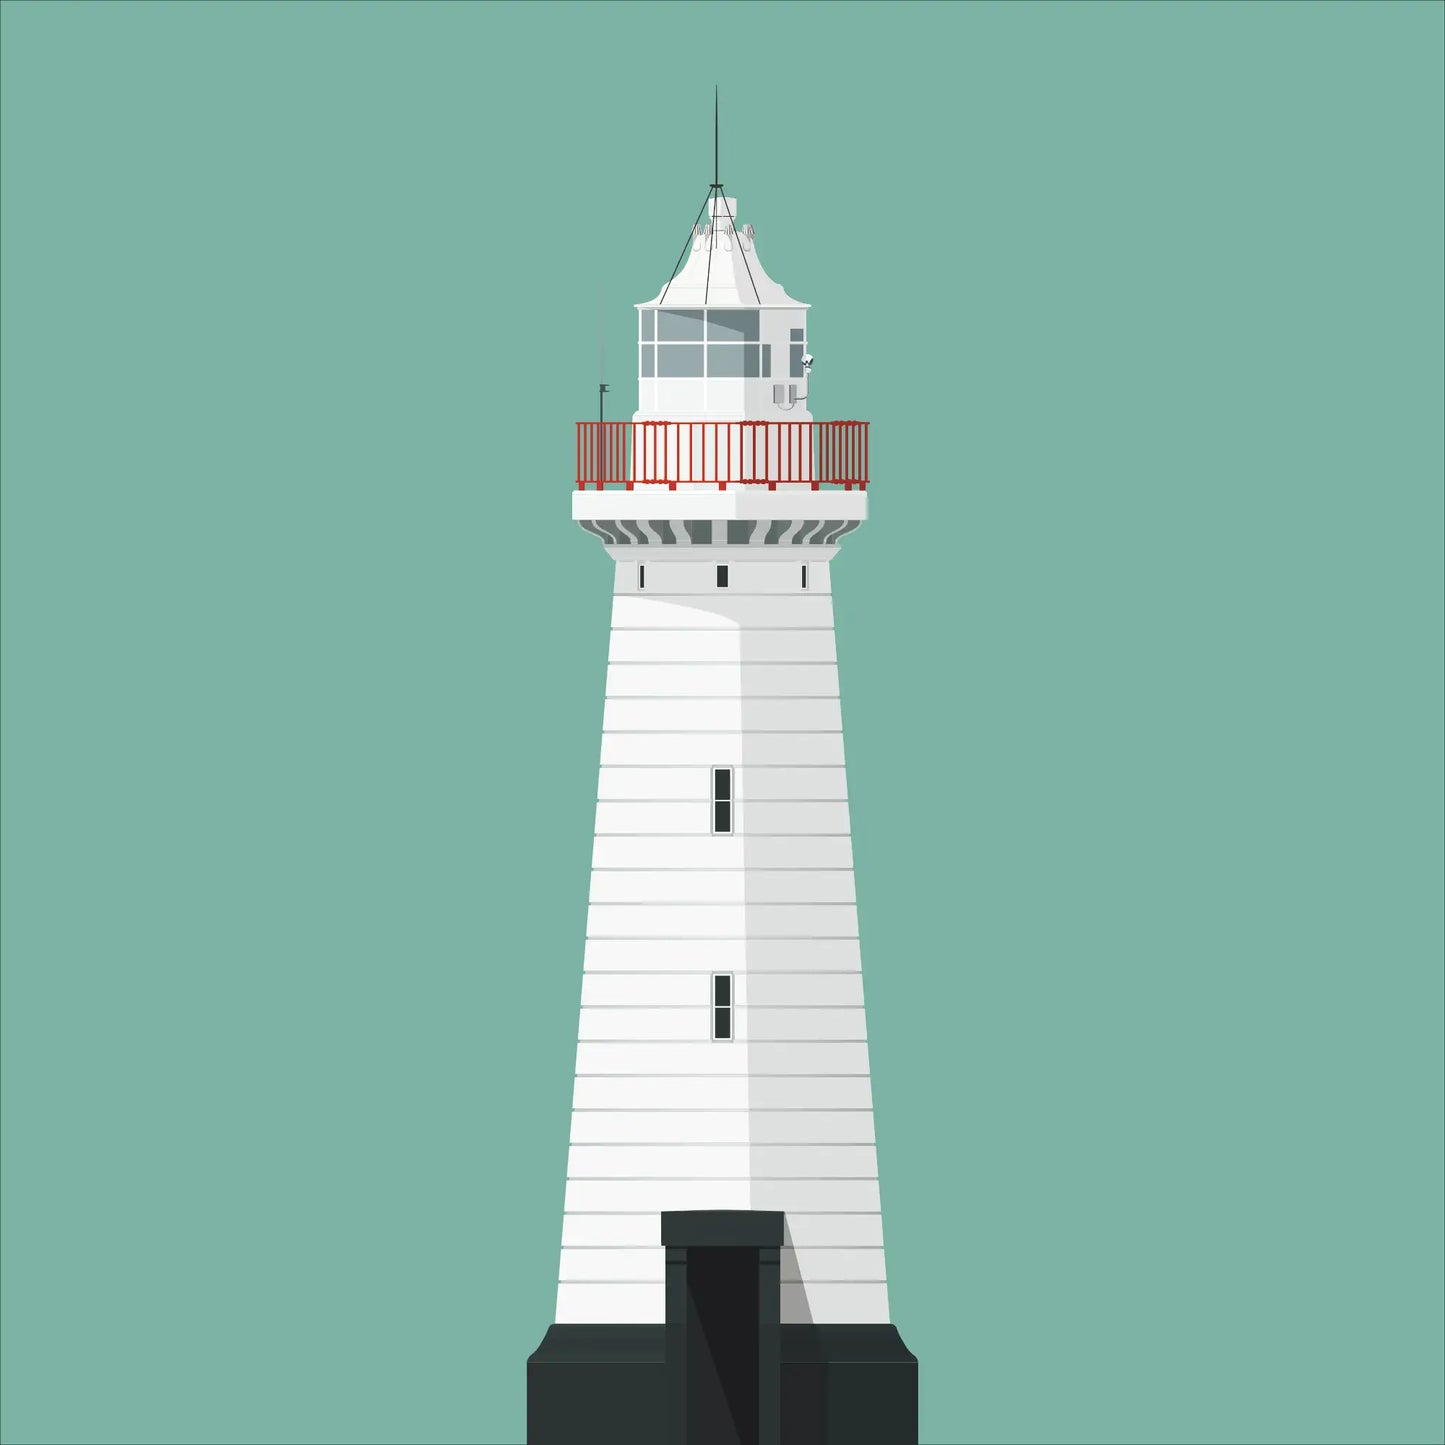 Contemporary graphic illustration of Donaghadee lighthouse on a white background inside light blue square.